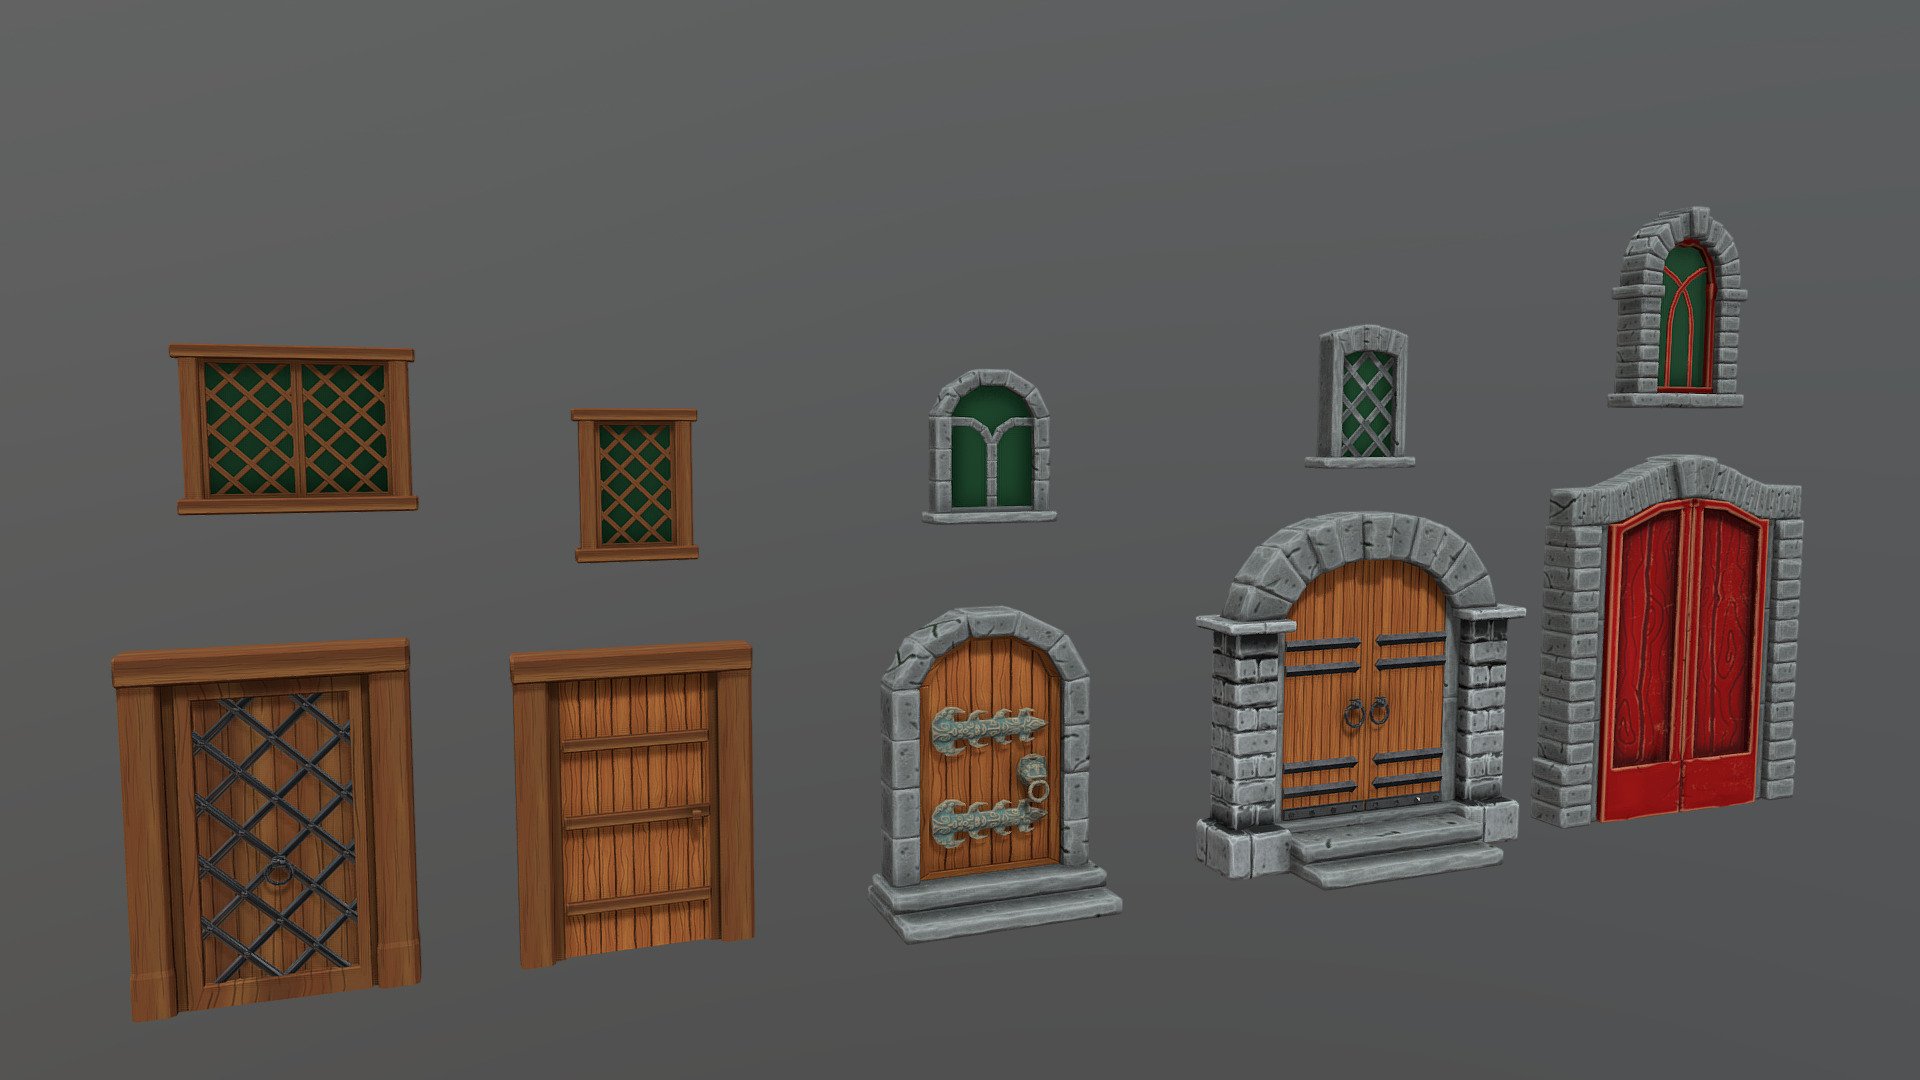 Game, AR and VR ready low poly stylized asset. Hand-painted PBR textures. 
All textures are 4K TGA and PNG files



In additional archive file you will find .blend .obj and .fbx files where meshes set up ready for import in game engine with pivots in the center of the world. 


All doors have thickness geometry and can be opened and animated by pivot rotation 3d model